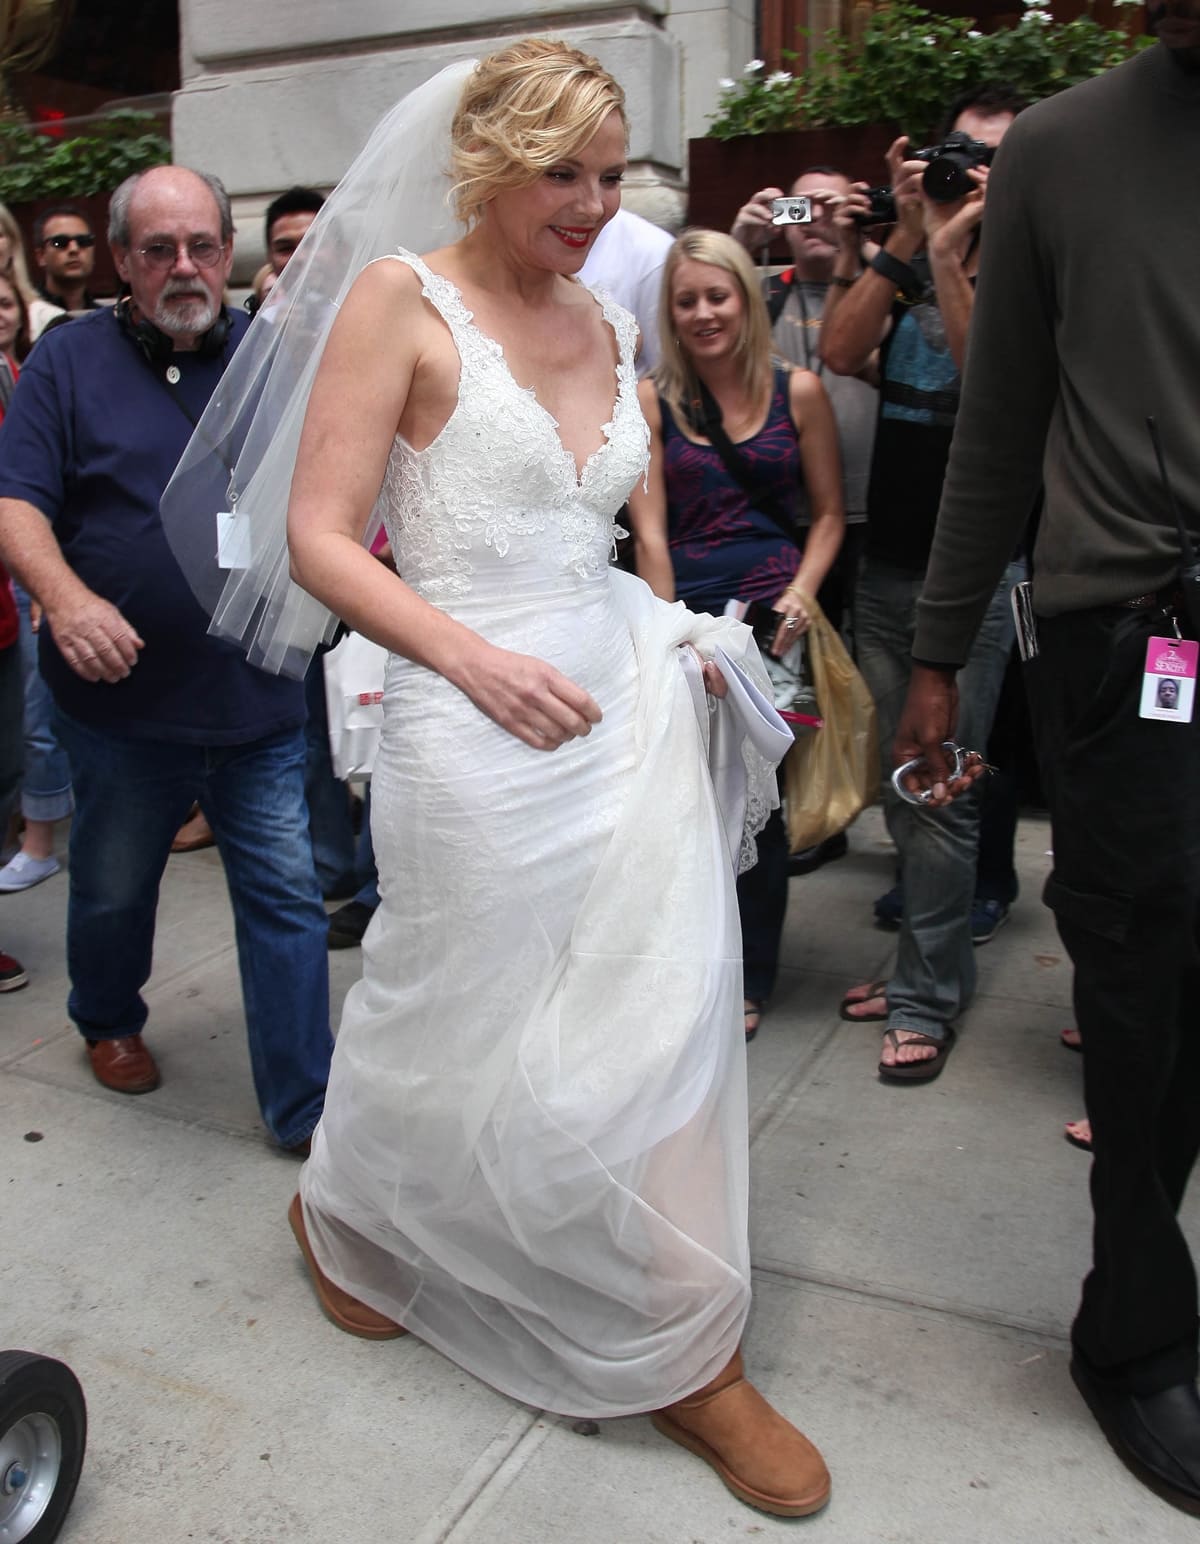 During the production of Sex And The City 2 in 2009, Kim Cattrall caught attention in New York City as she sported Ugg boots while donning her white bridesmaid's dress